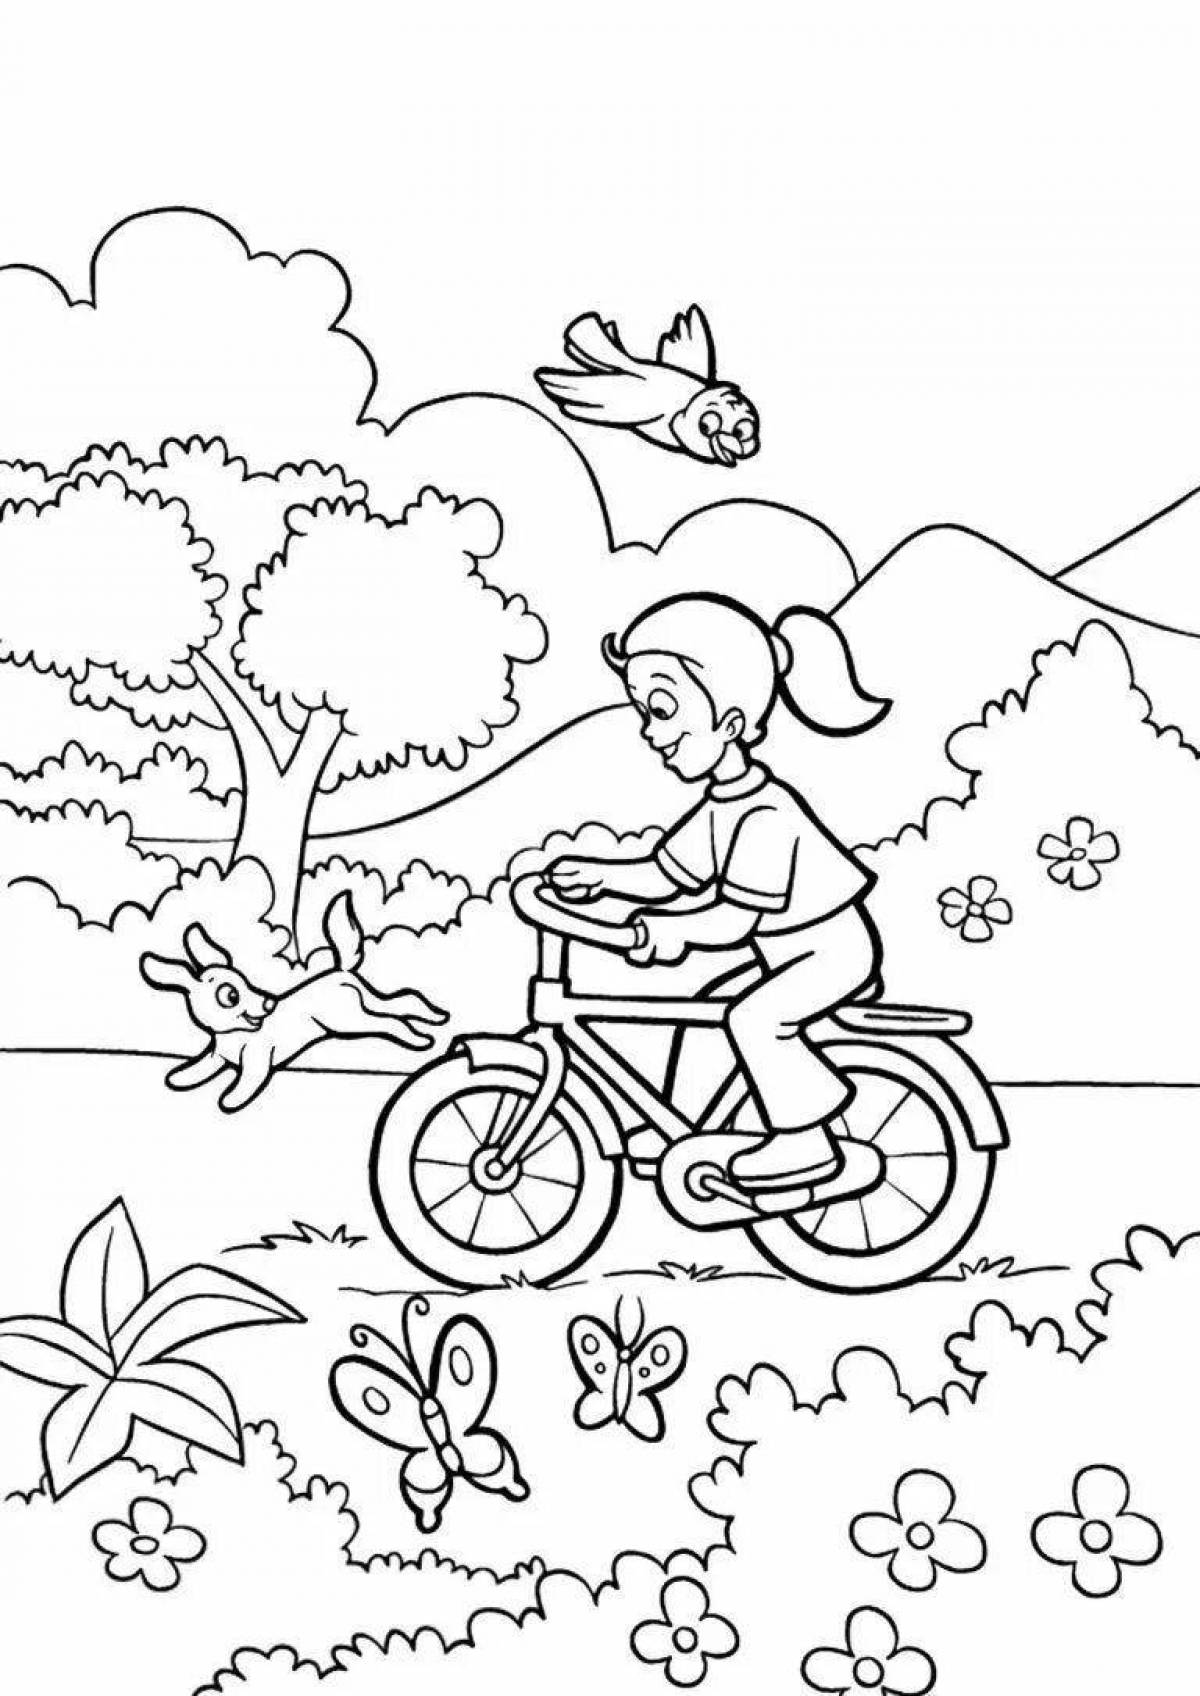 Bright summer coloring for kids